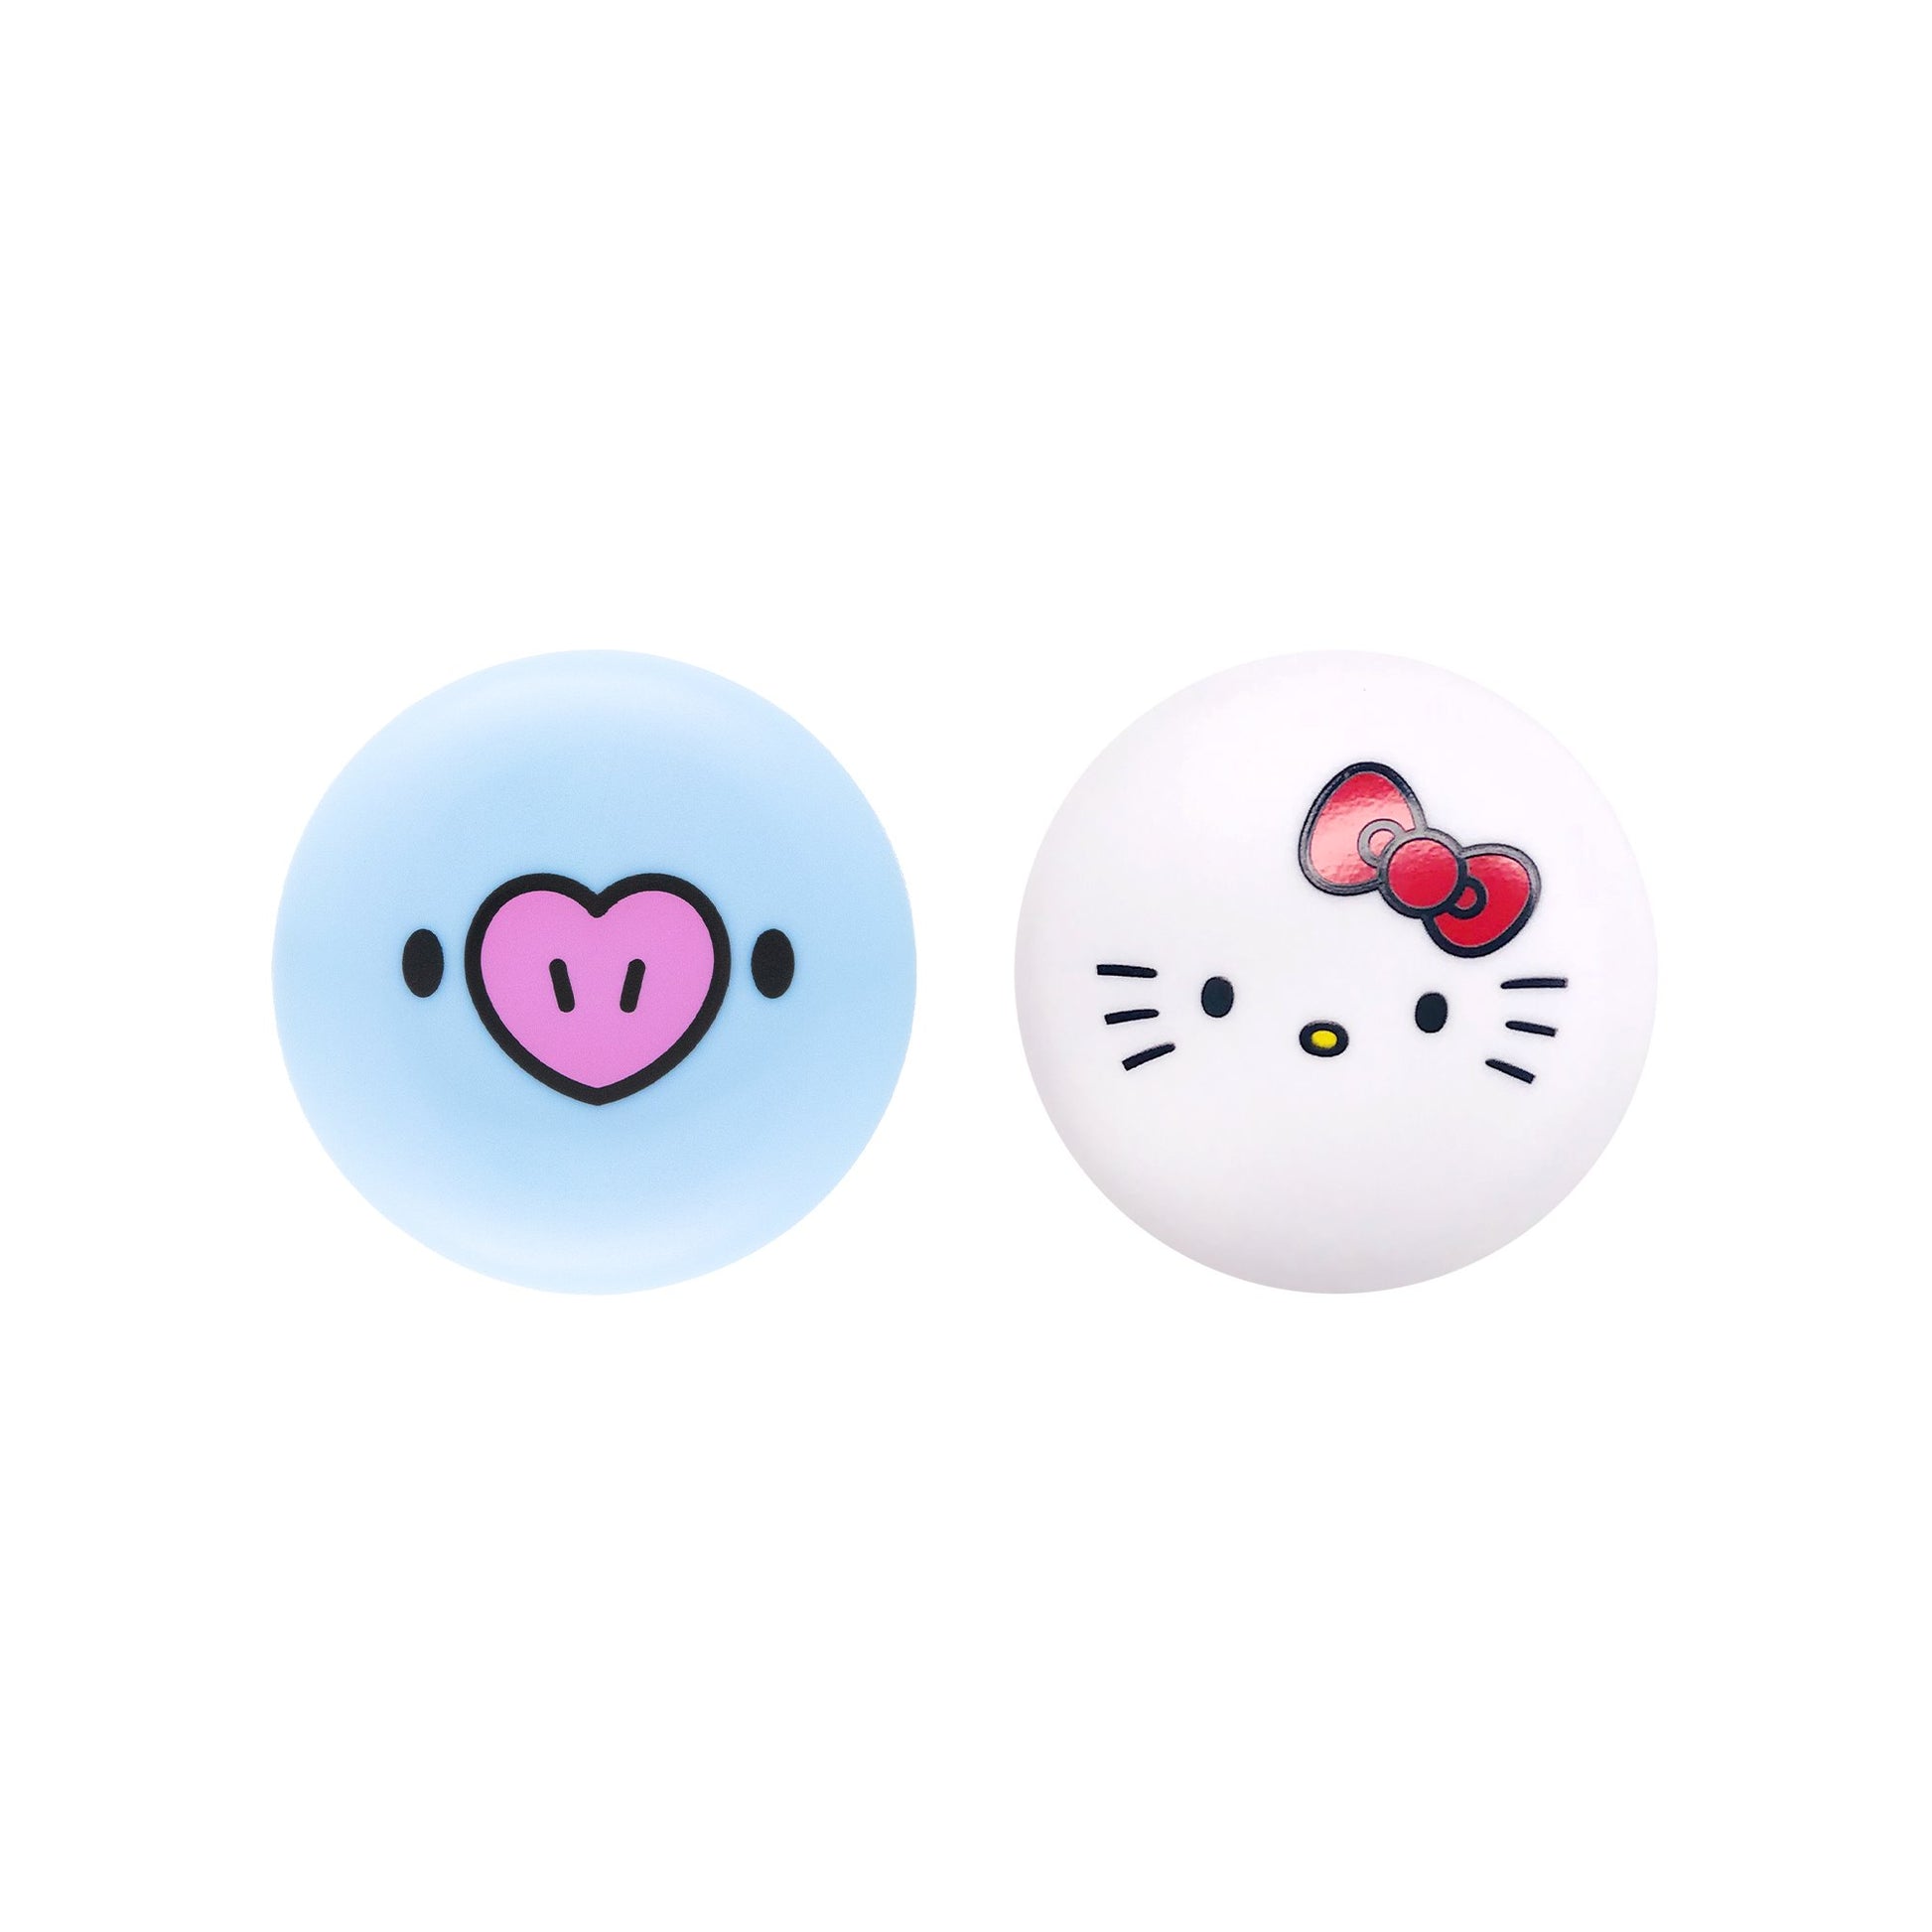 Limited Edition Hello Kitty & BT21 MANG Moisturizing Macaron Lip Balm Duo with Shea Butter and Vitamin E, $18